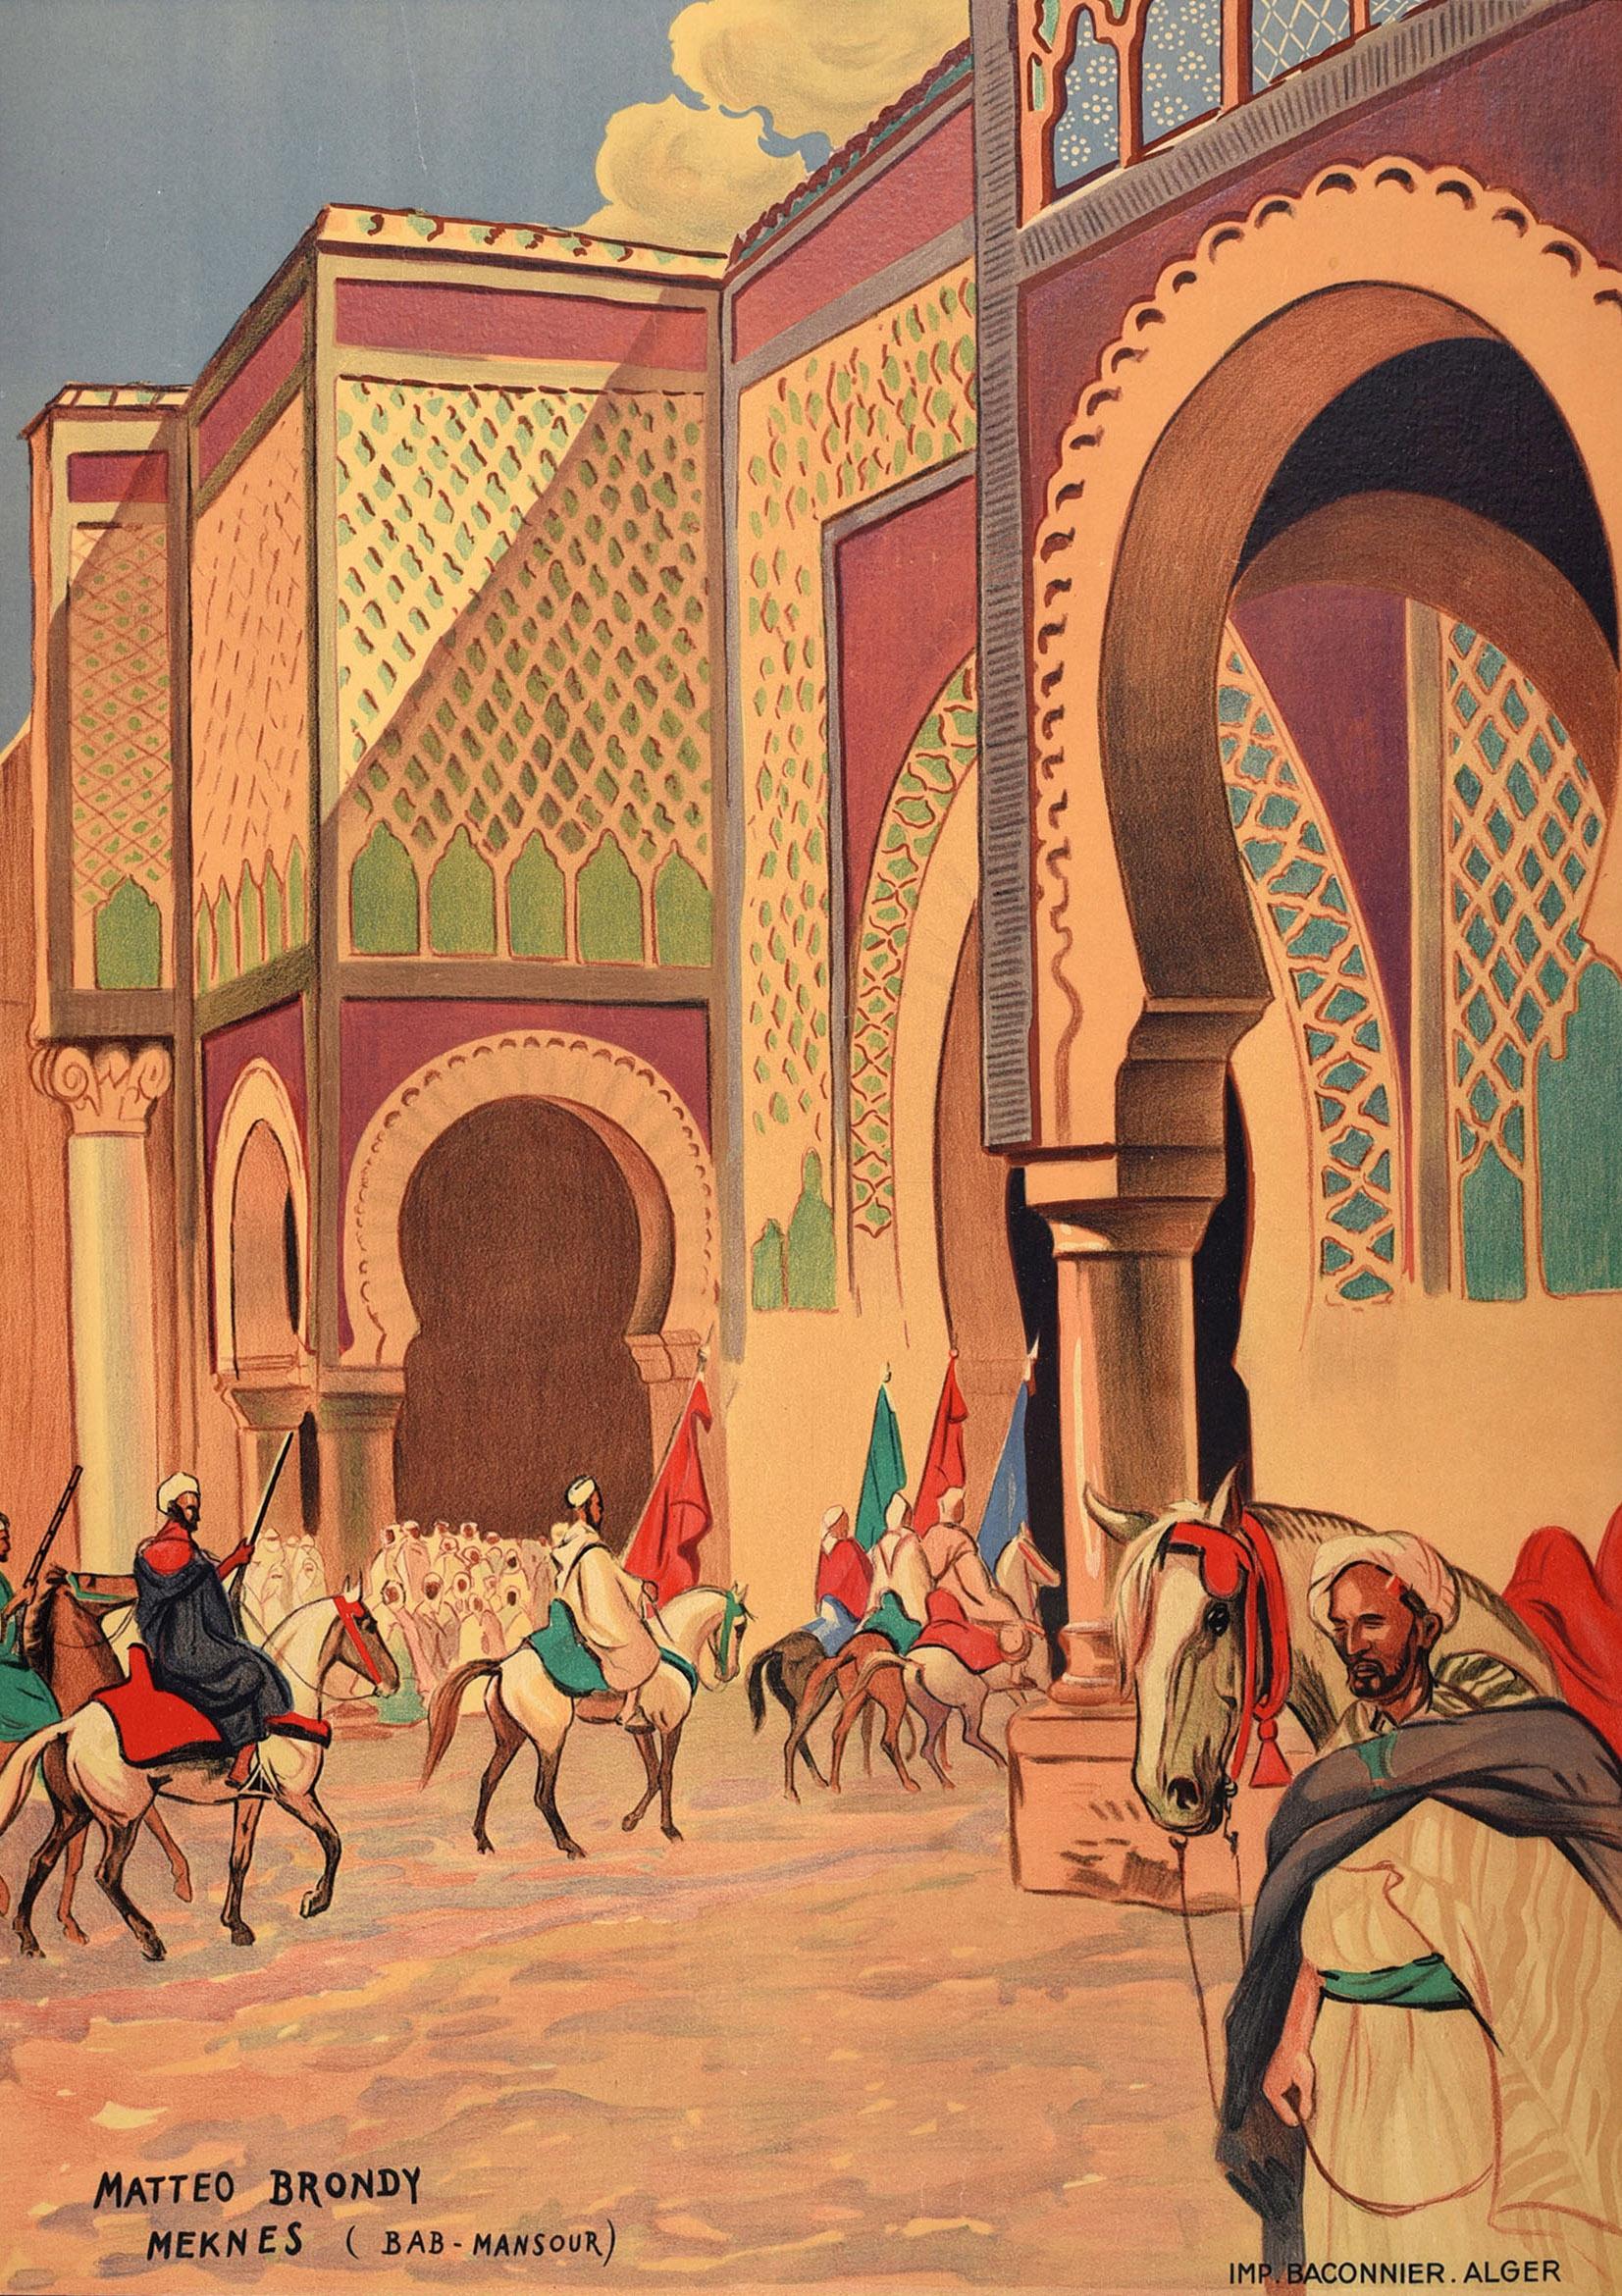 Original antique North Africa travel poster for Meknes Ancient Residence Of The Sultans Of Morocco / Antique Residence Des Sultans Du Maroc featuring artwork by Matteo Brondy (1866-1944) showing men on horses riding through the historic Bab Mansour